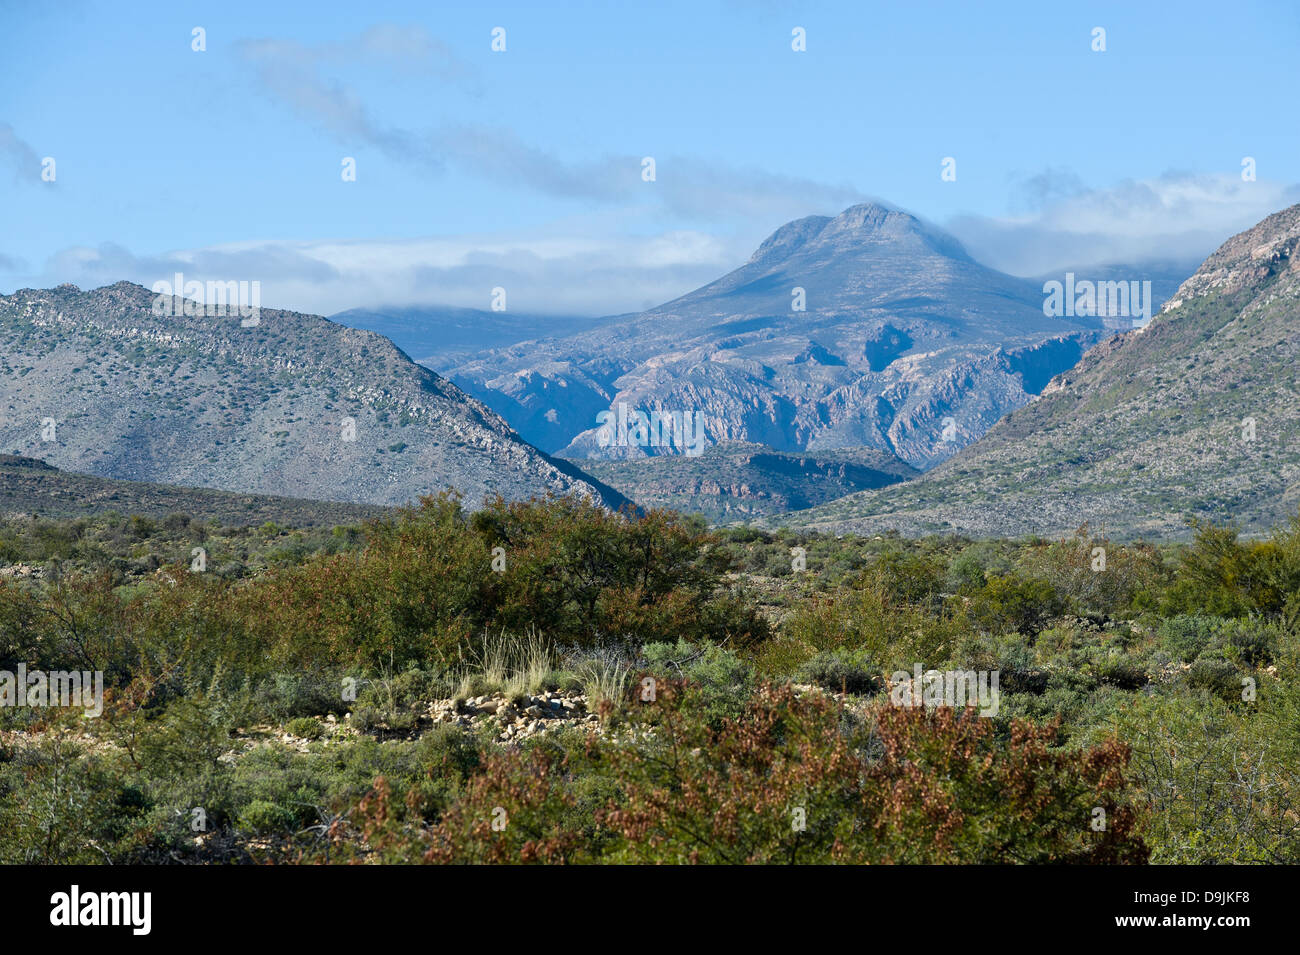 Karoo vegetation, mountains and house, Prince Albert, Western Cape, South Africa Stock Photo